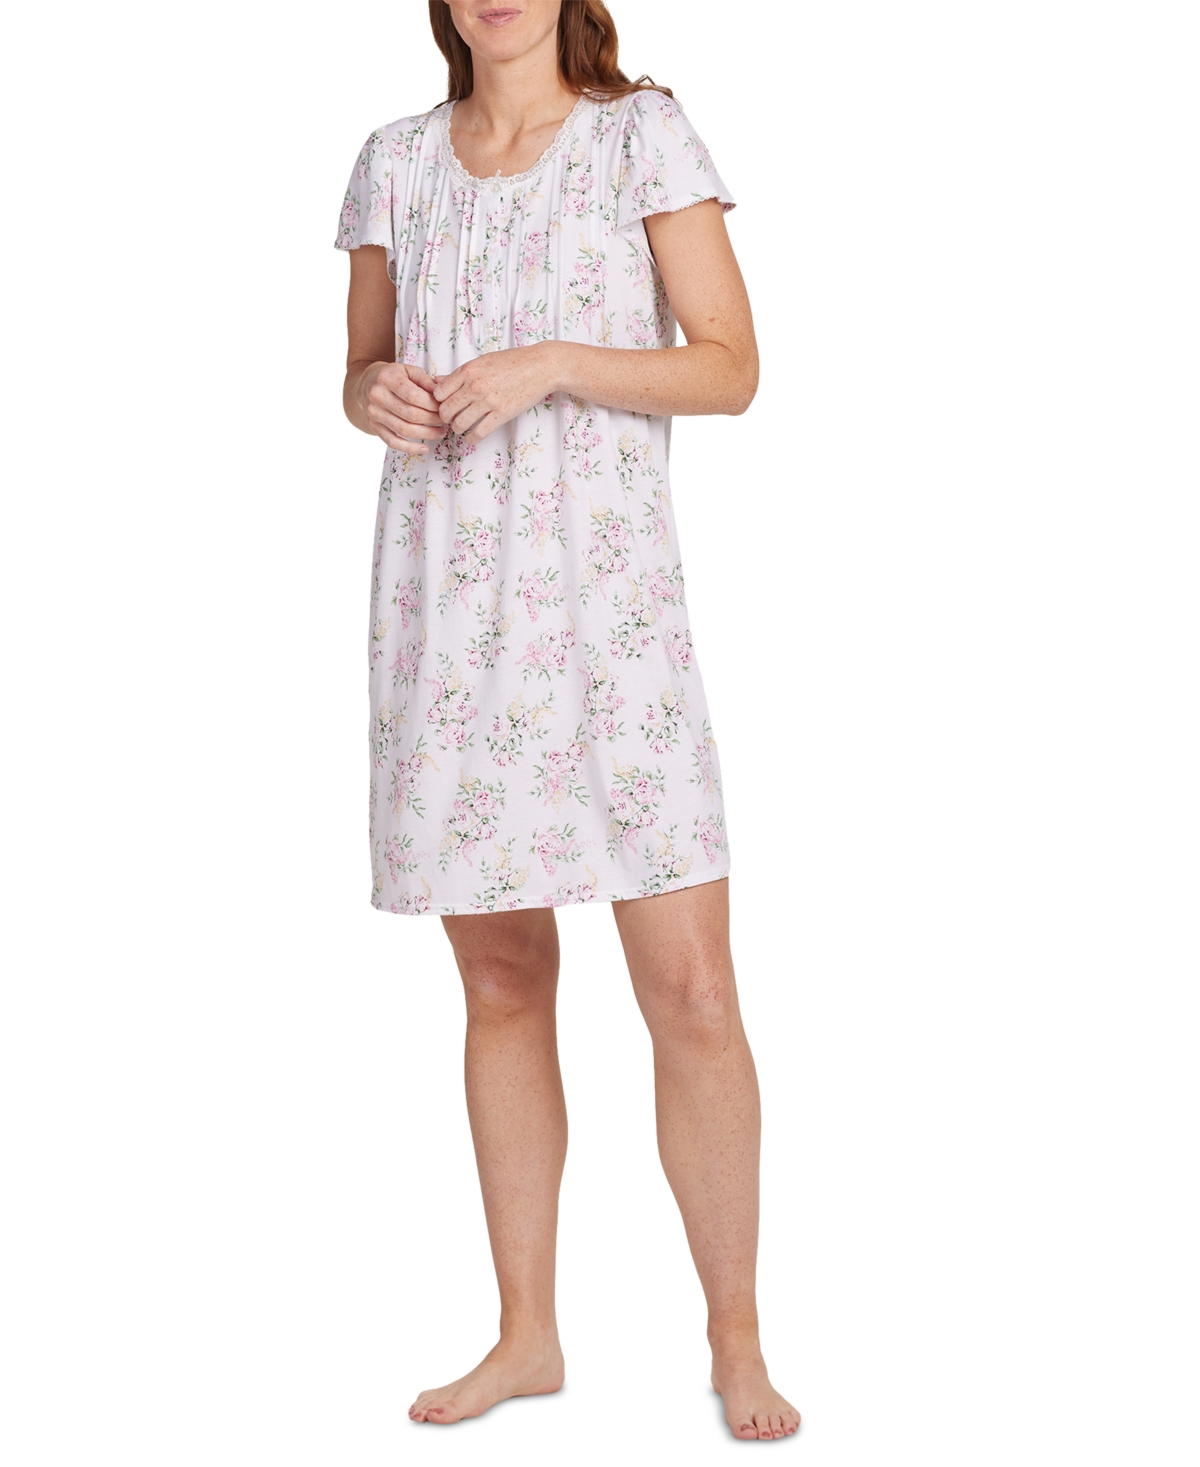 Women's Short-Sleeve Floral Nightgown - Pink/yellow Rose Floral